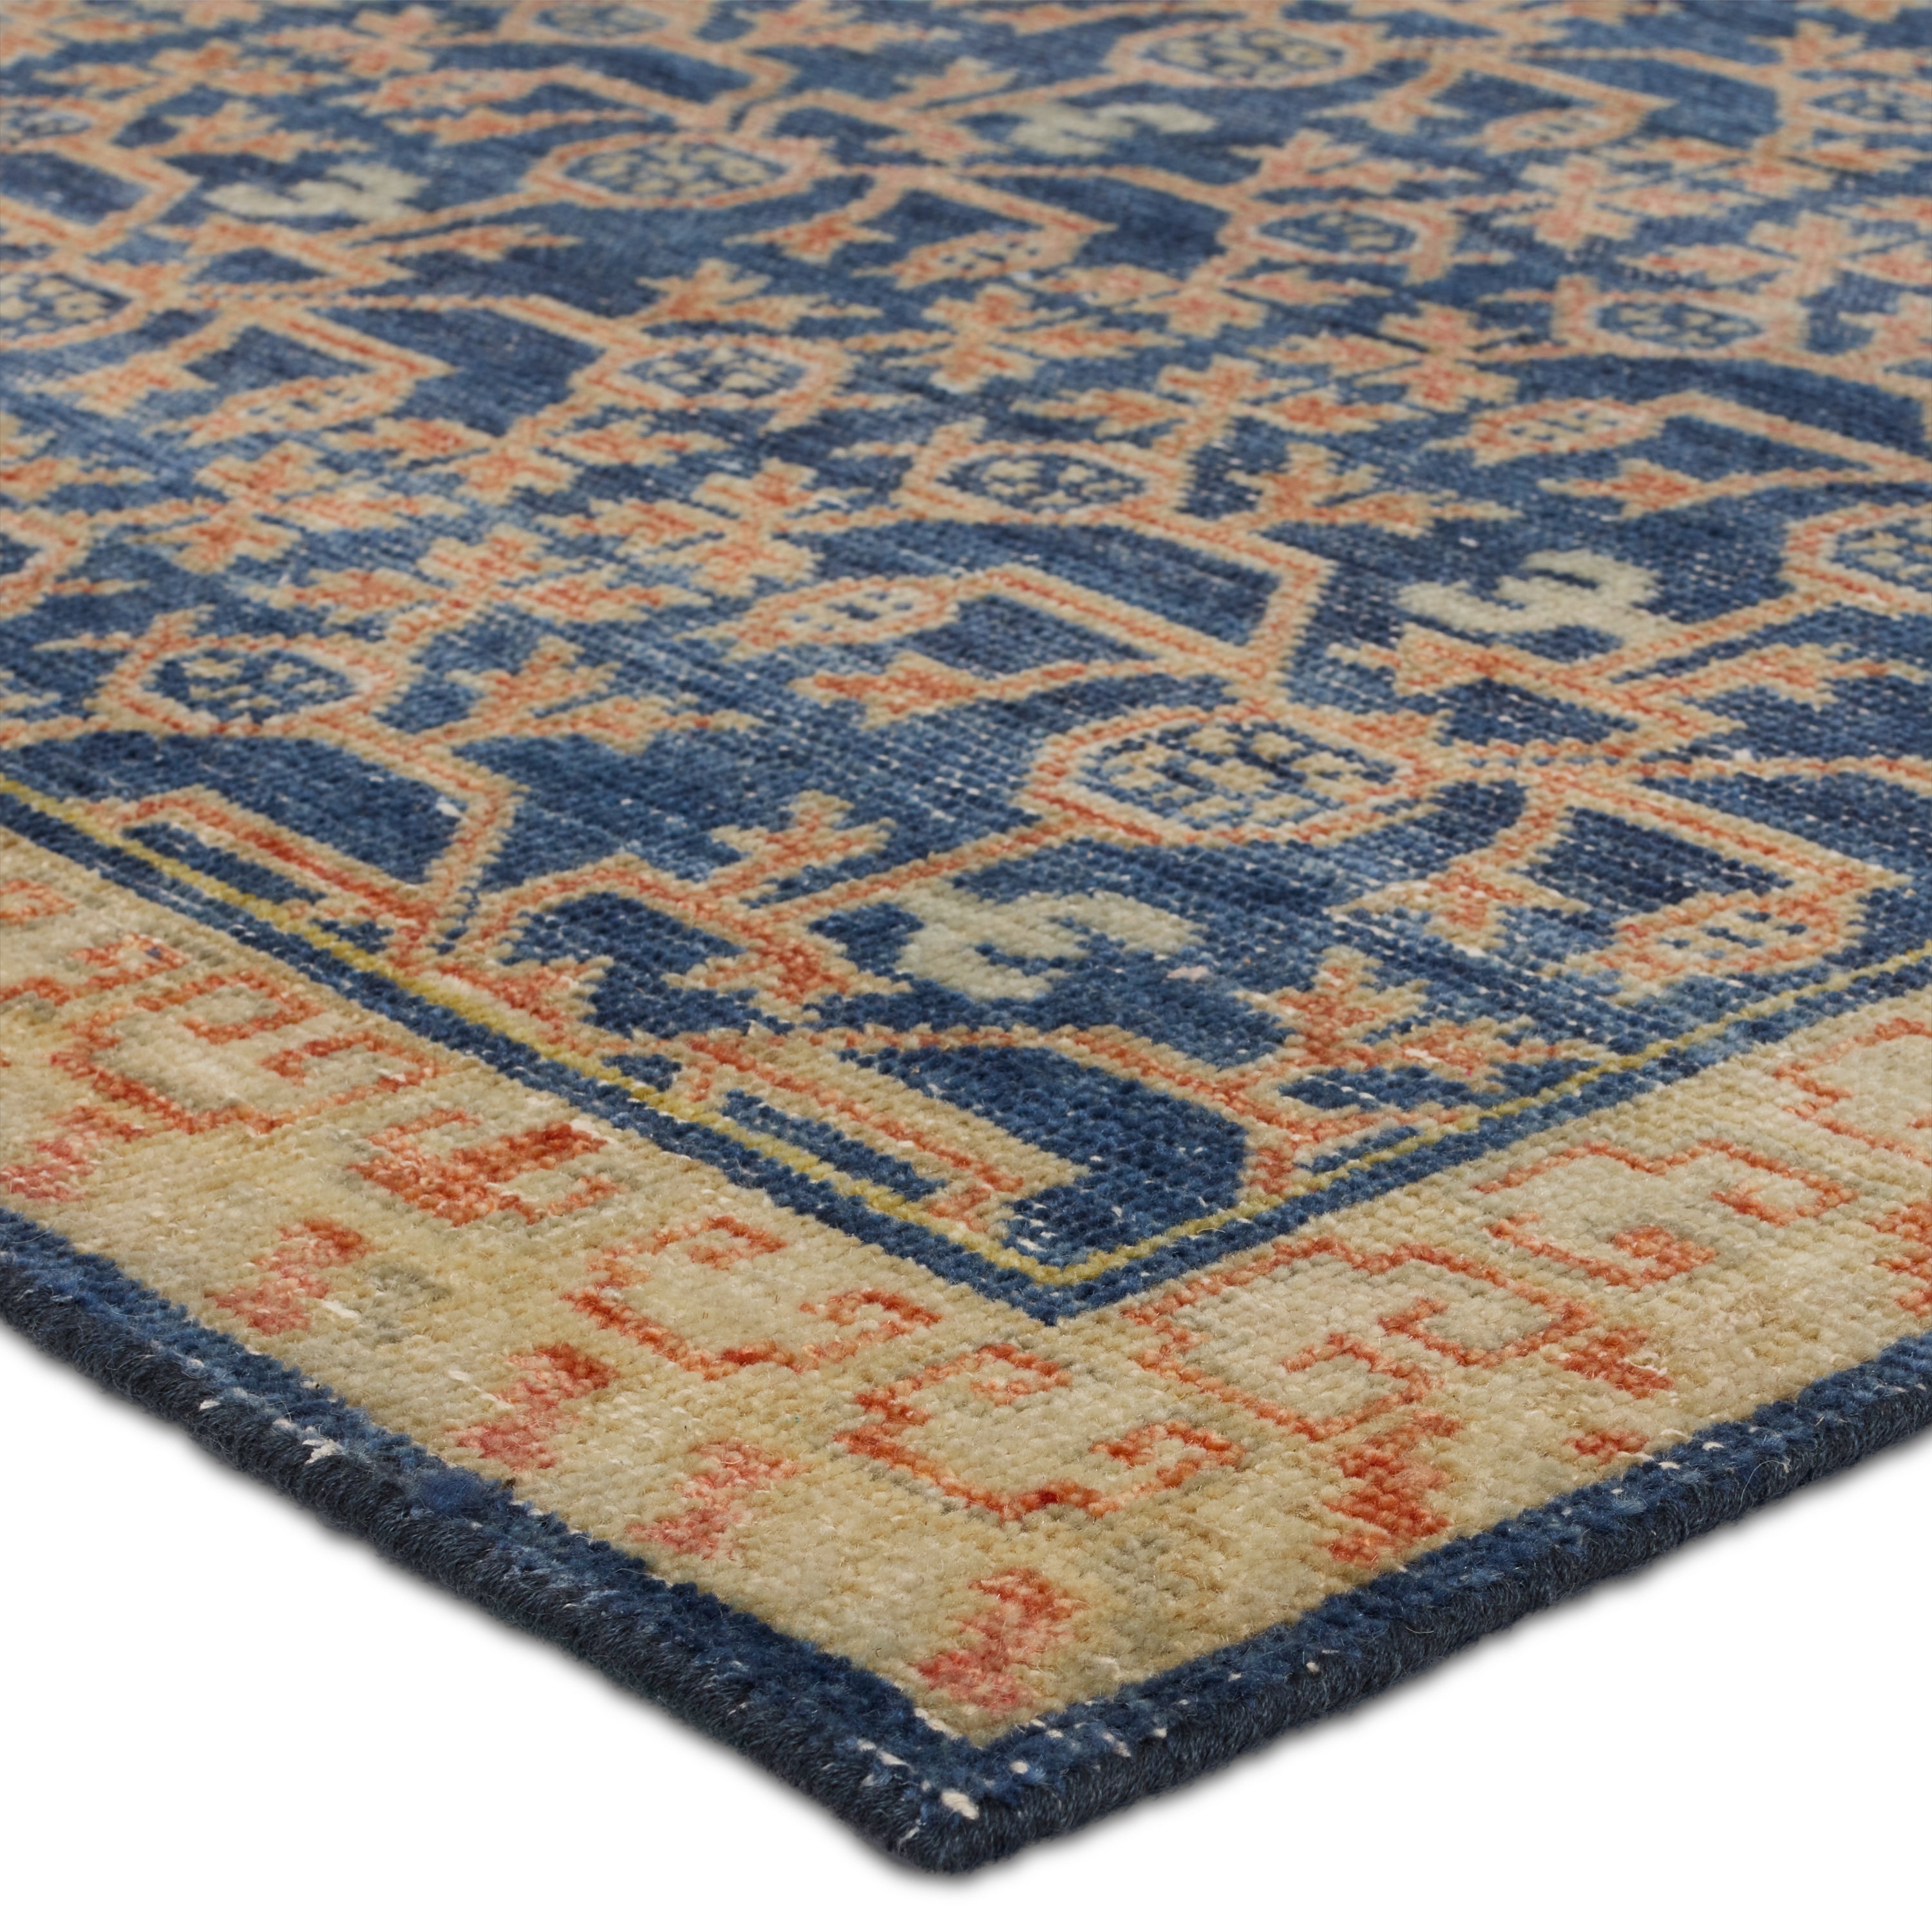 The Eden collection pairs fresh, vibrant colors with provincial Persian motifs for the perfect blend of new and time-honored. This hand-knotted wool rug features a hand-sheared quality that lends the design a perfectly vintage and a lovingly worn look. The earthy tones of the Merriman rug provide an inviting and grounding accent to any heavily trafficked and well-lived rooms in the home. Amethyst Home provides interior design, new construction, custom furniture, and area rugs in the Dallas metro area.